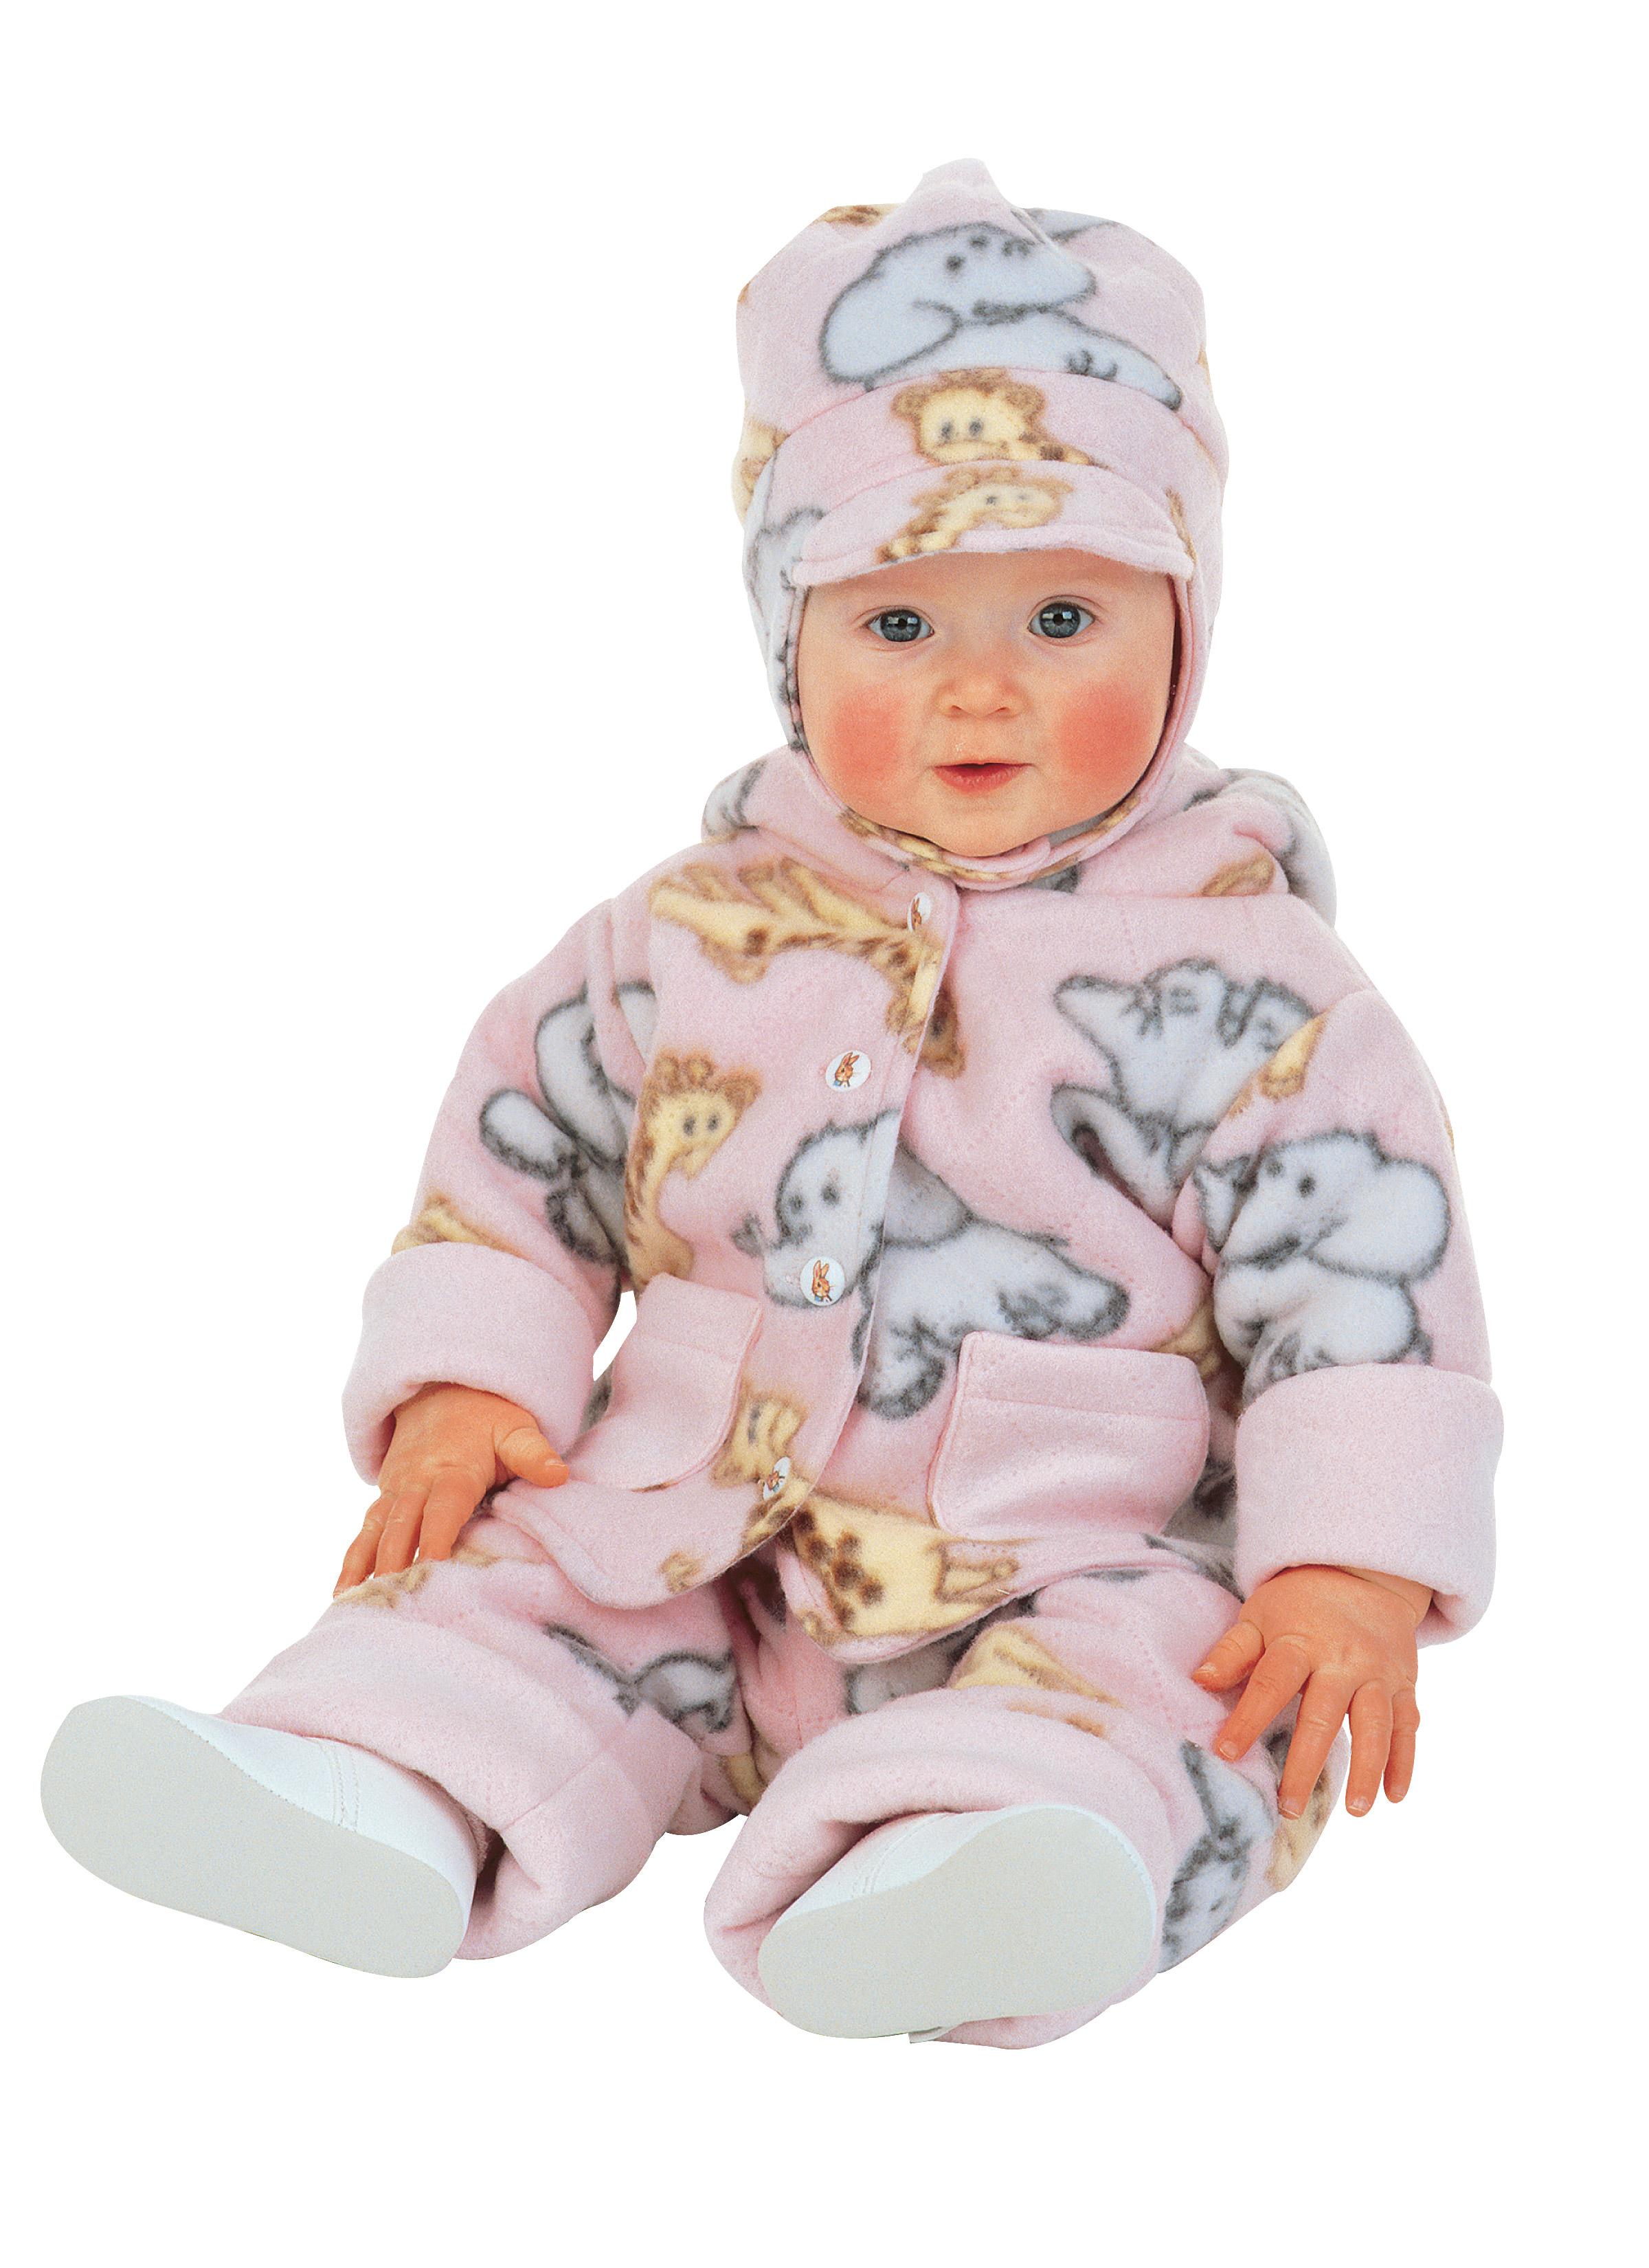 Butterick B5584 Infants' Jacket, Overalls, Pants, Hat and Mittens